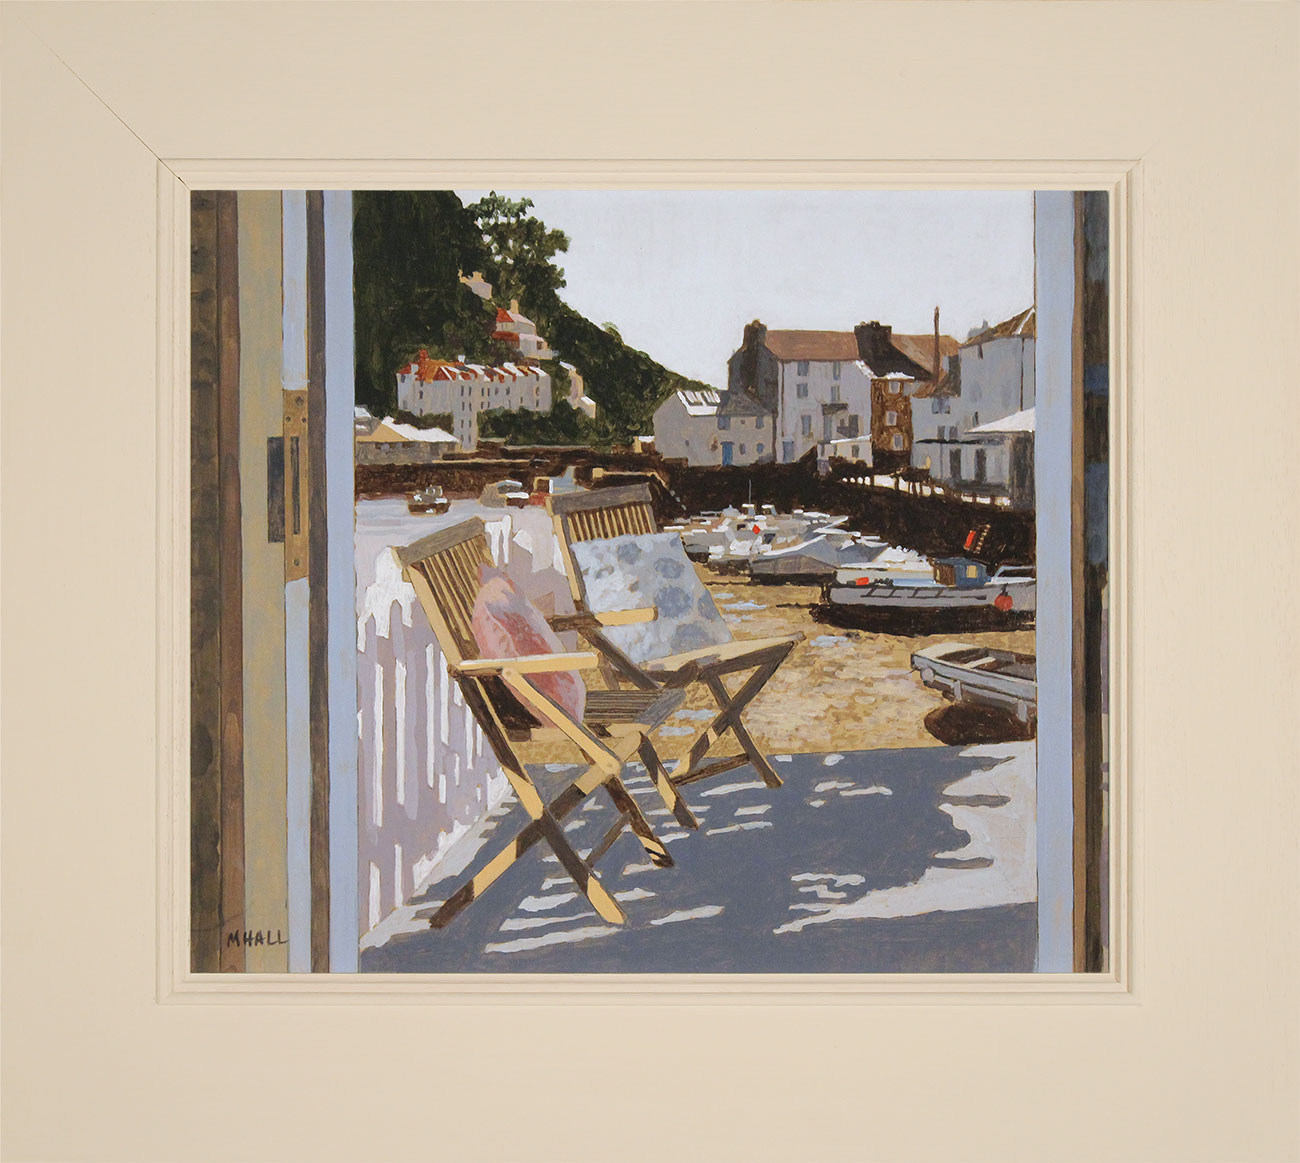 Mike Hall, Original acrylic painting on board, Polperro Harbour at Low Tide. Click to enlarge